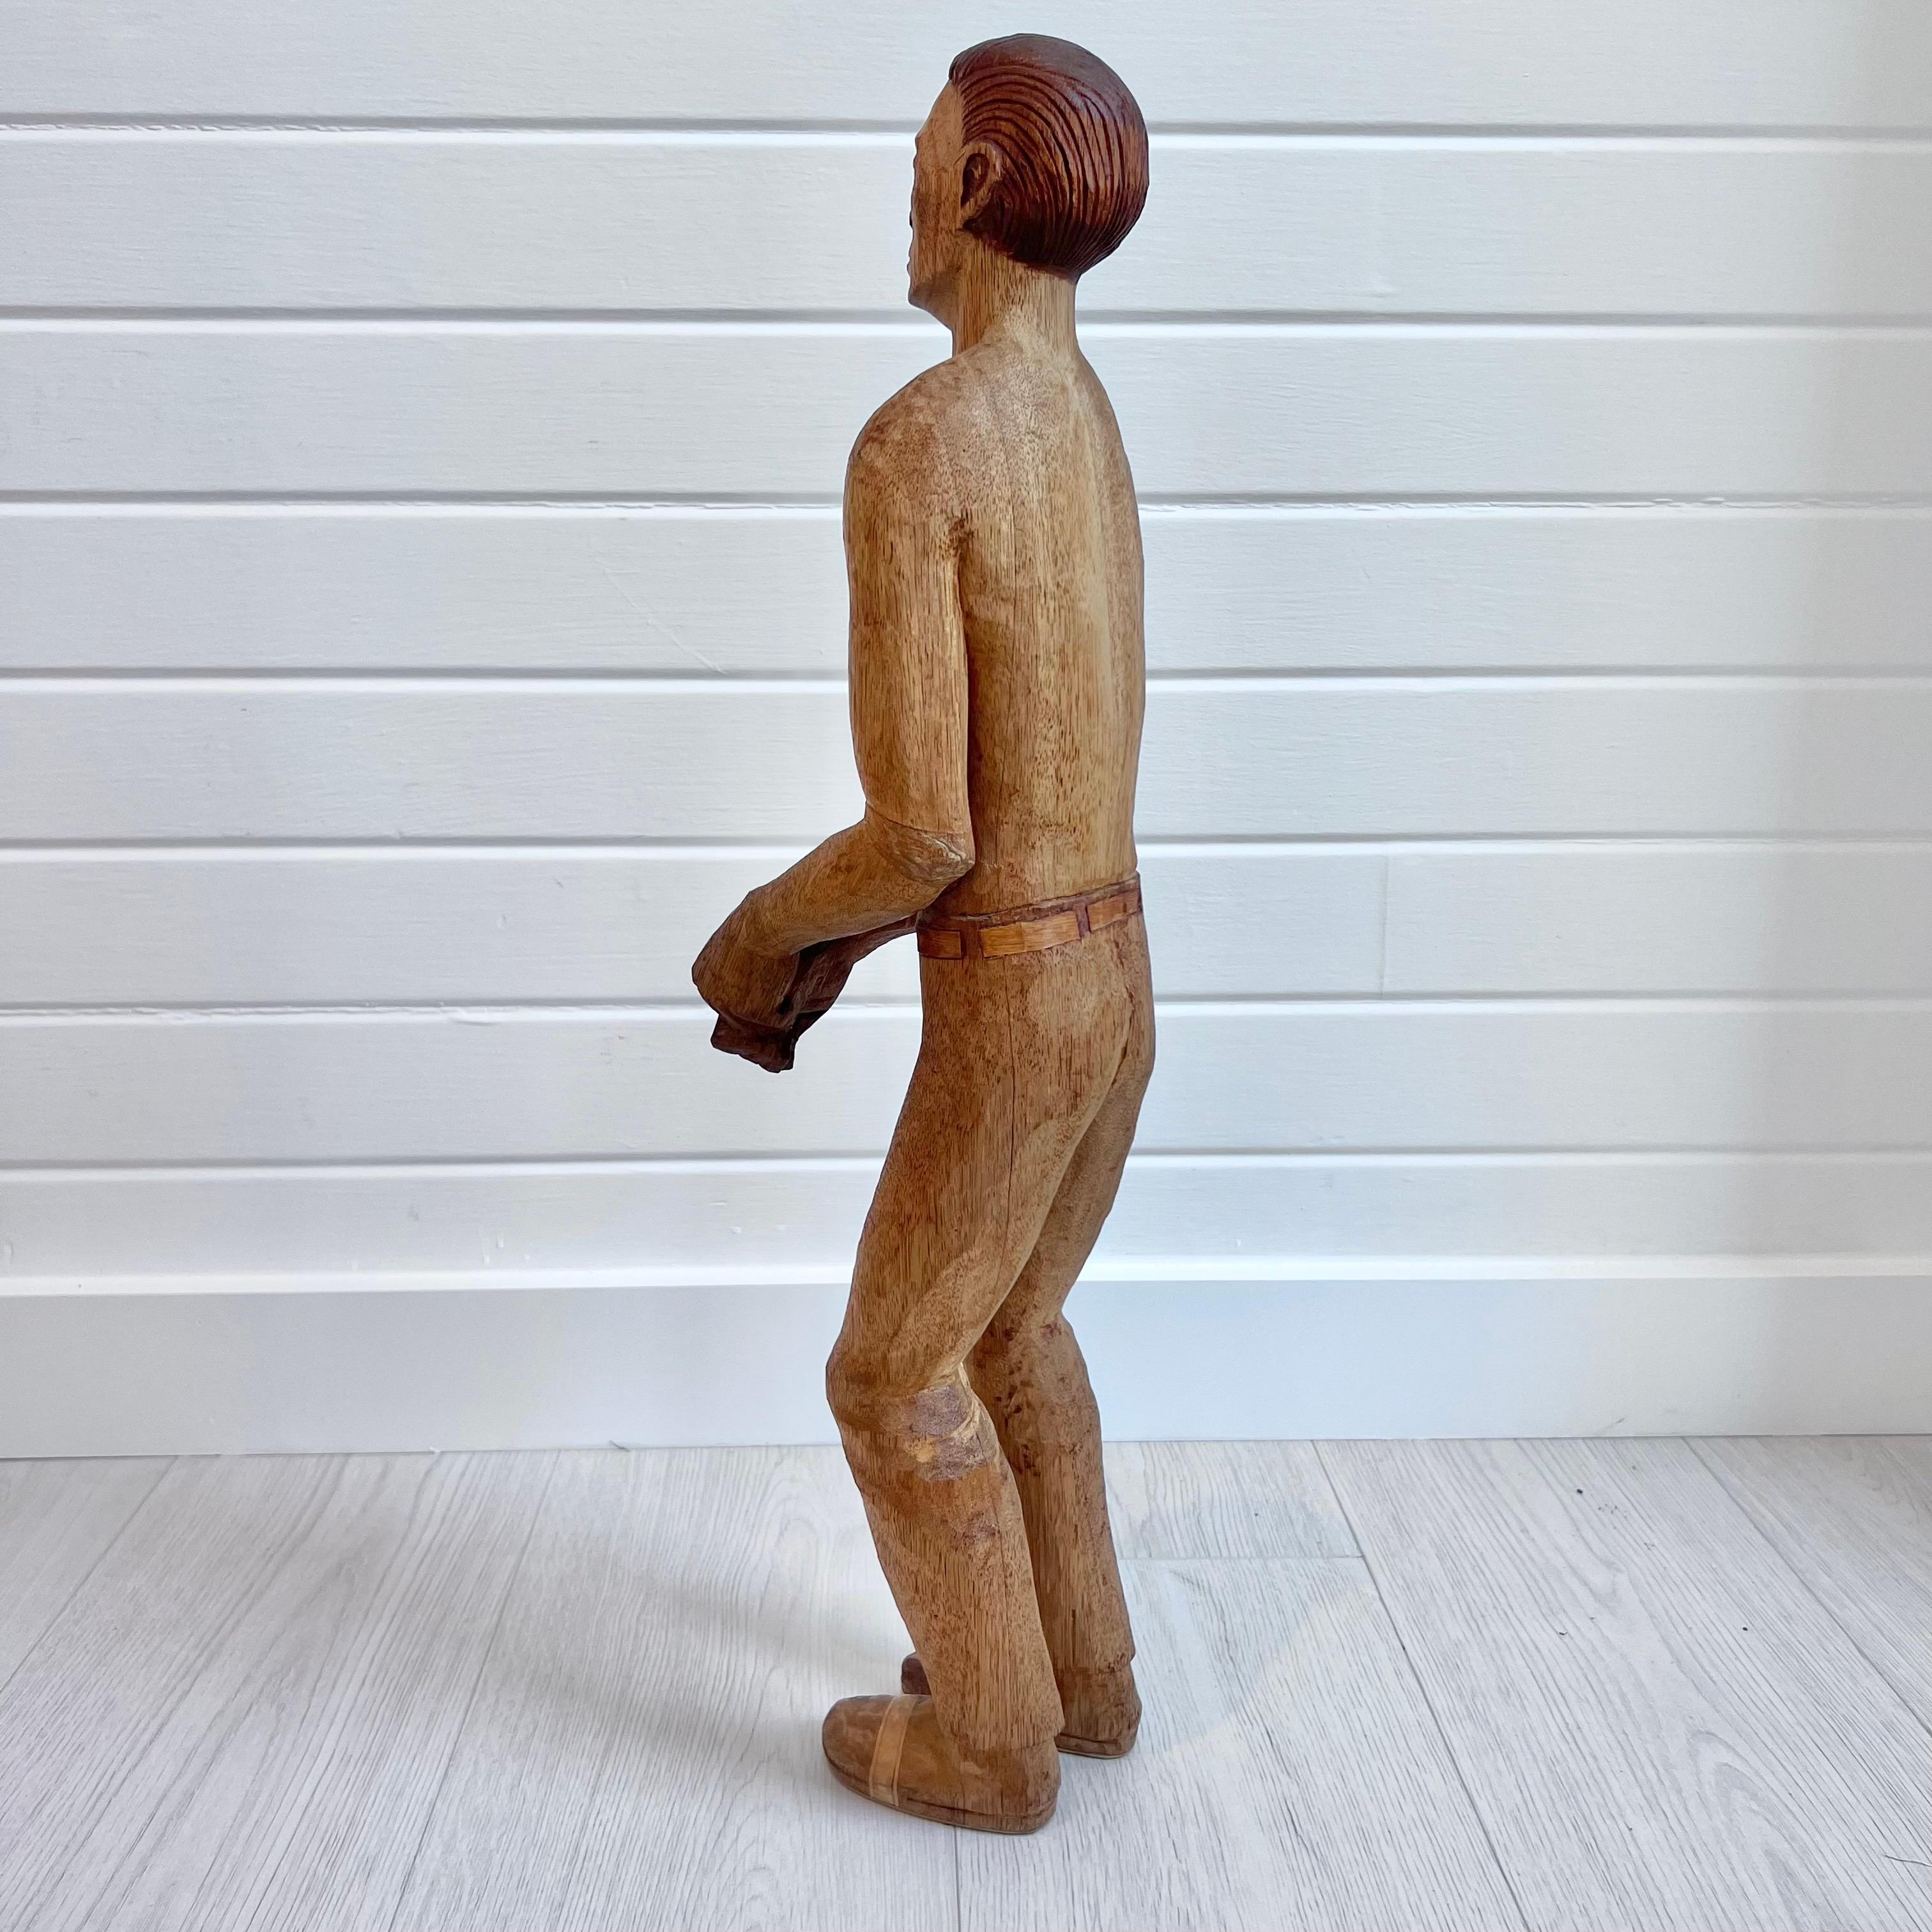 Antique Wooden Folk Art Male Figure, Early 20th century USA For Sale 2